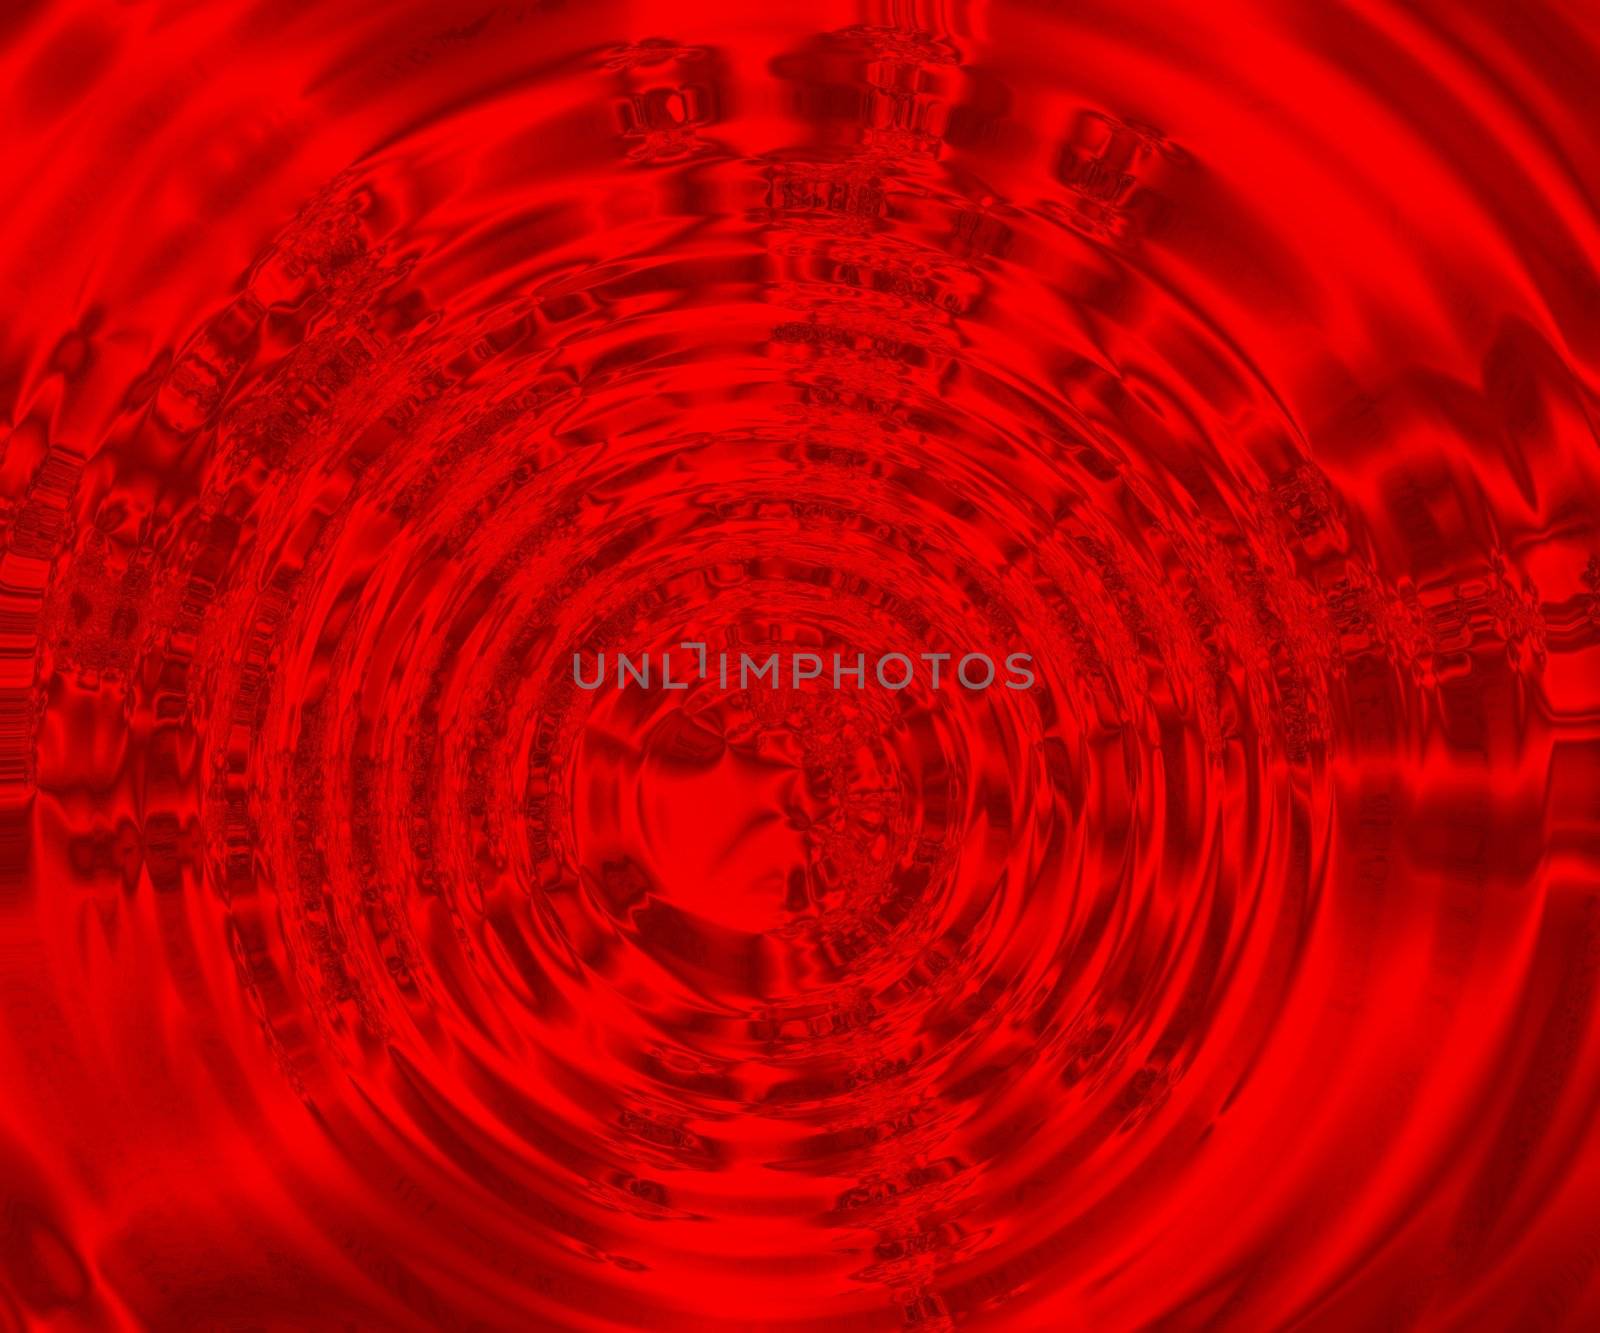 red background with concentric rings or ripples